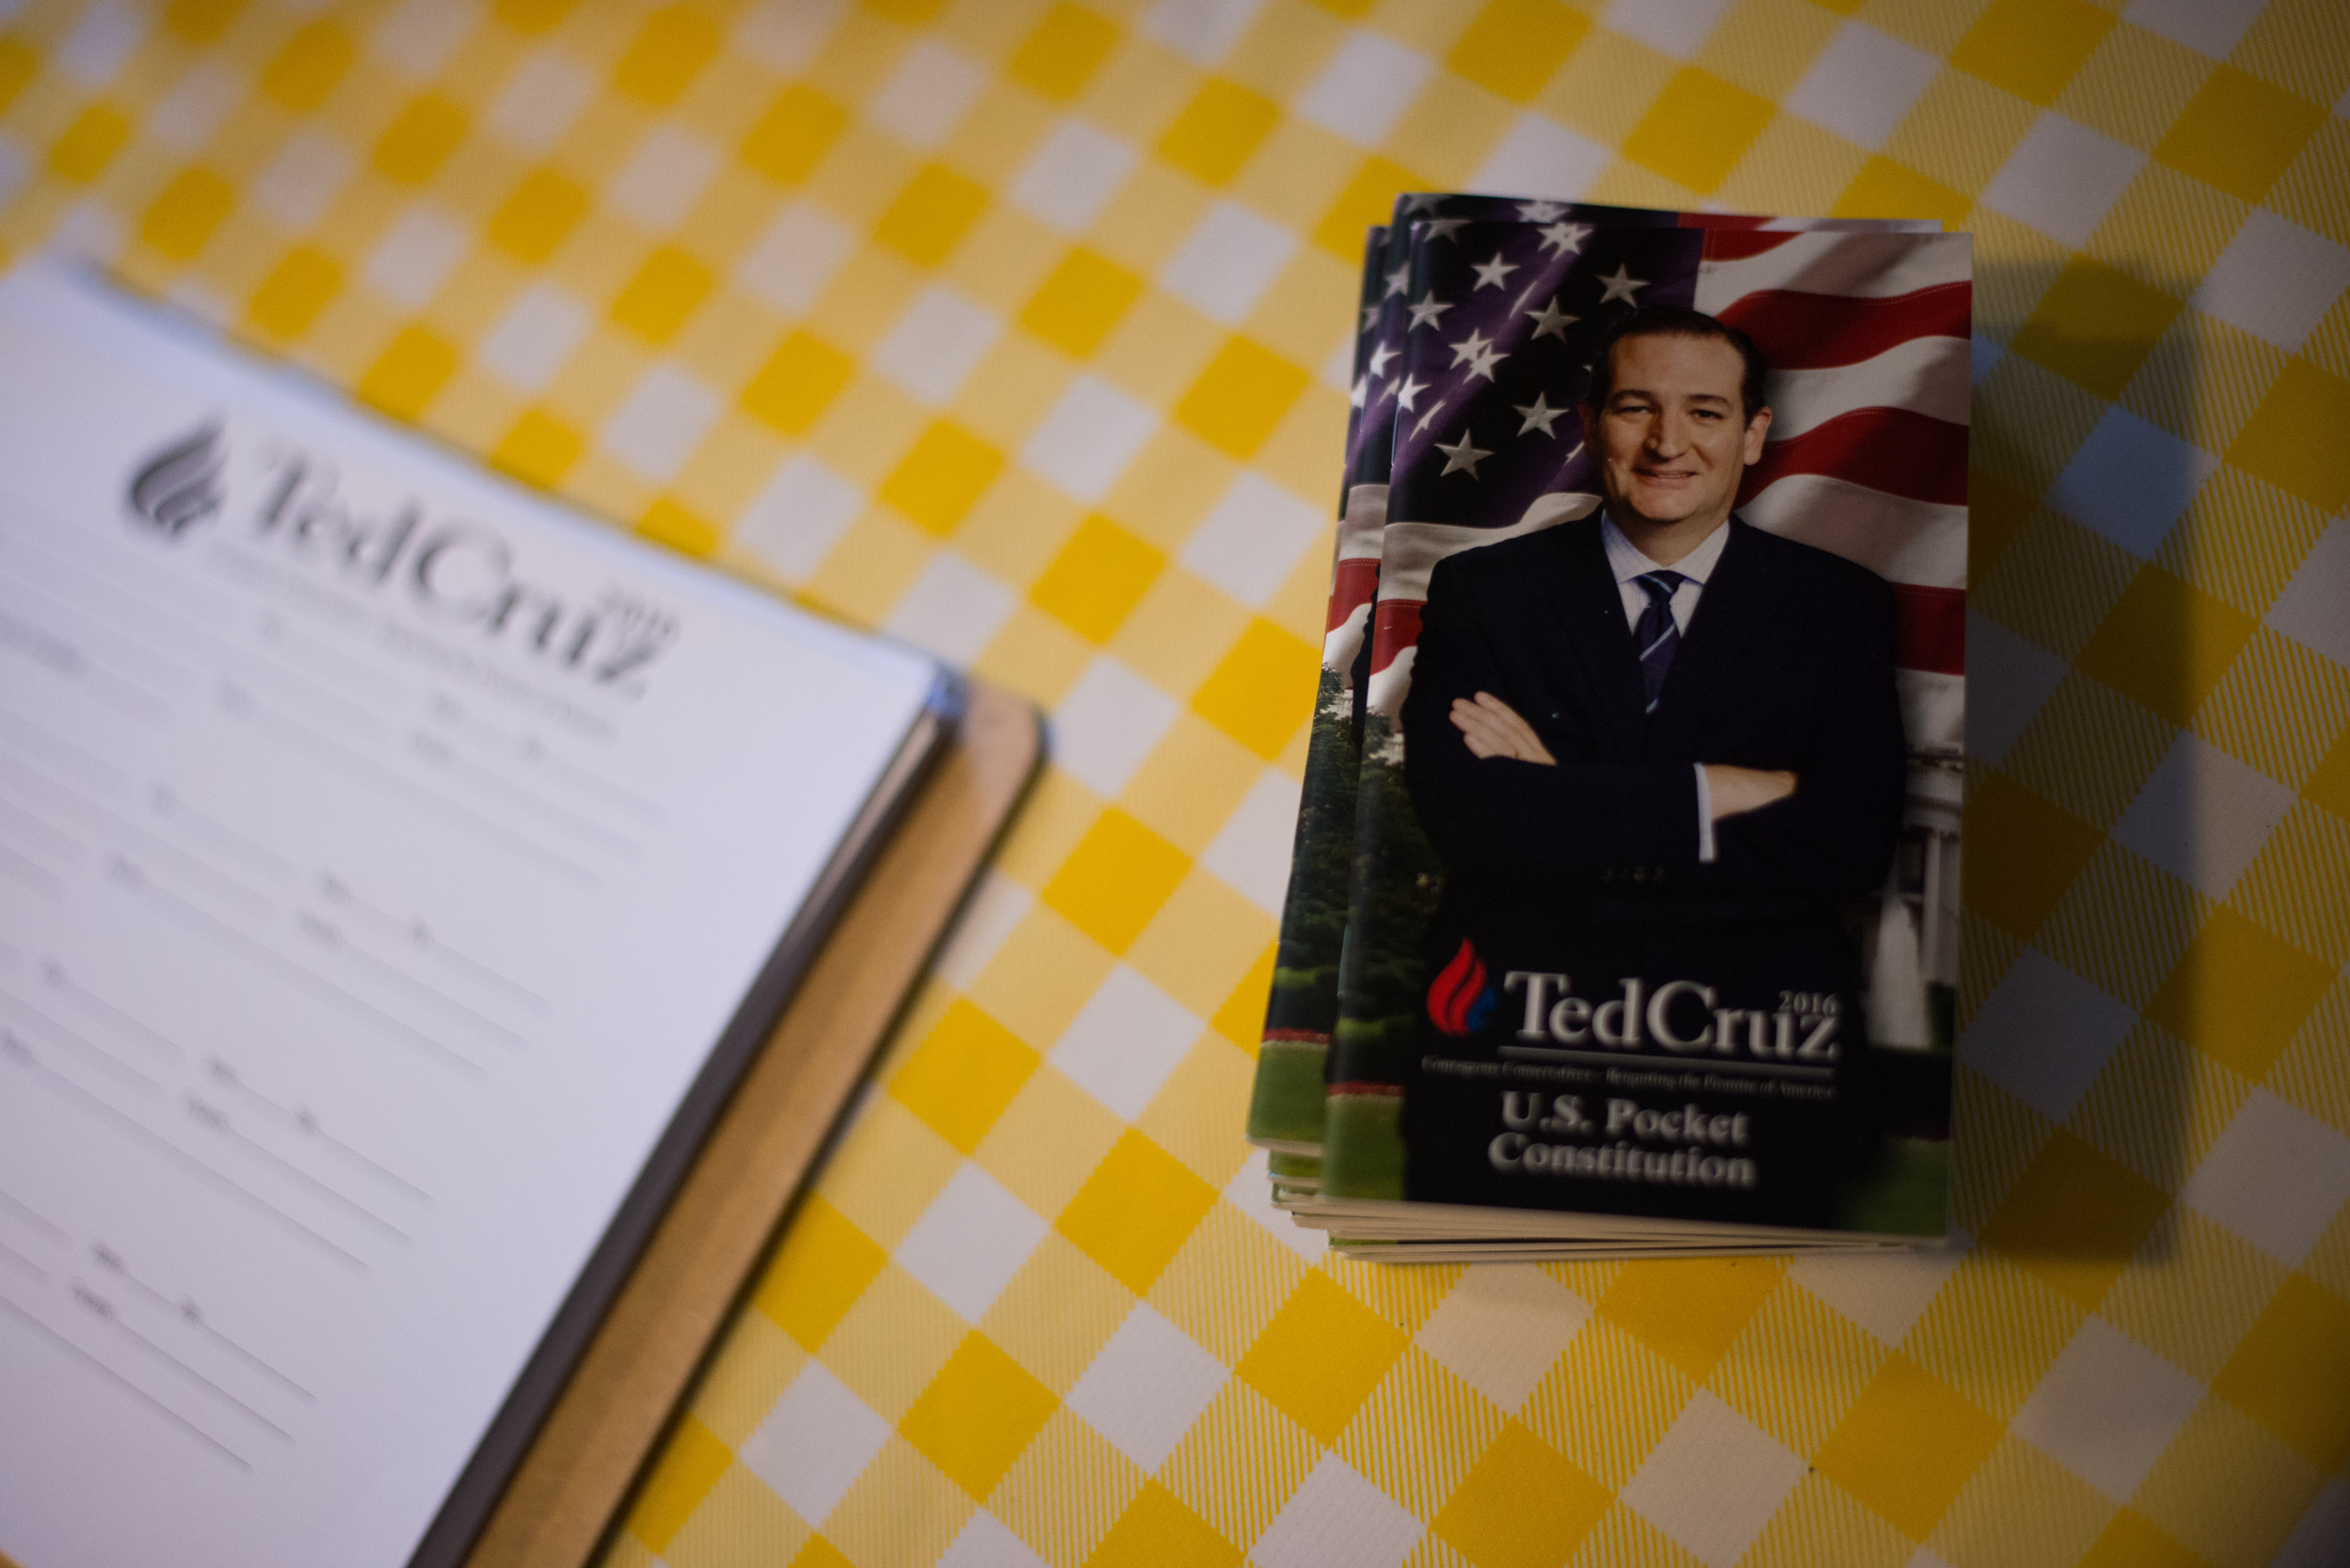  Copies of the United States Constitution handed by the campaign of Republican presidential candidate Ted Cruz sit on a table during a campaign stop at Tiger Den restaurant in Lenox, Iowa, on Nov. 28, 2015. 